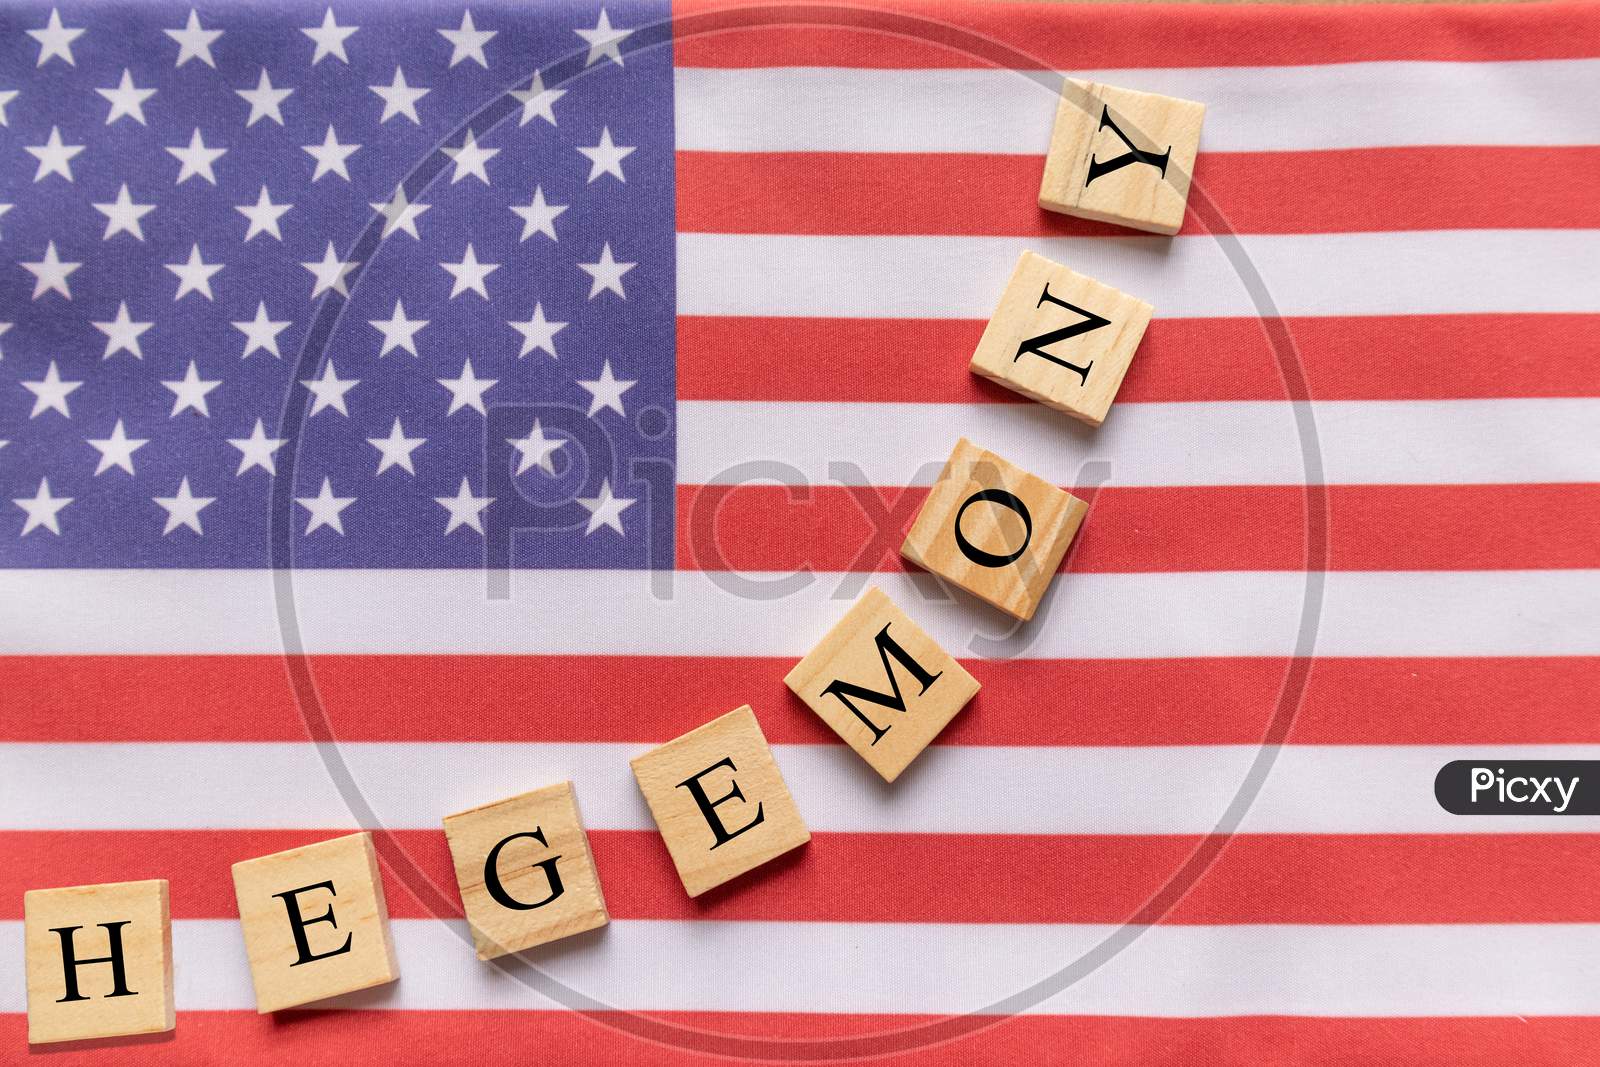 Concept Of Us Hegemony, Hegemony In Wooden Block Letters On Us Flag